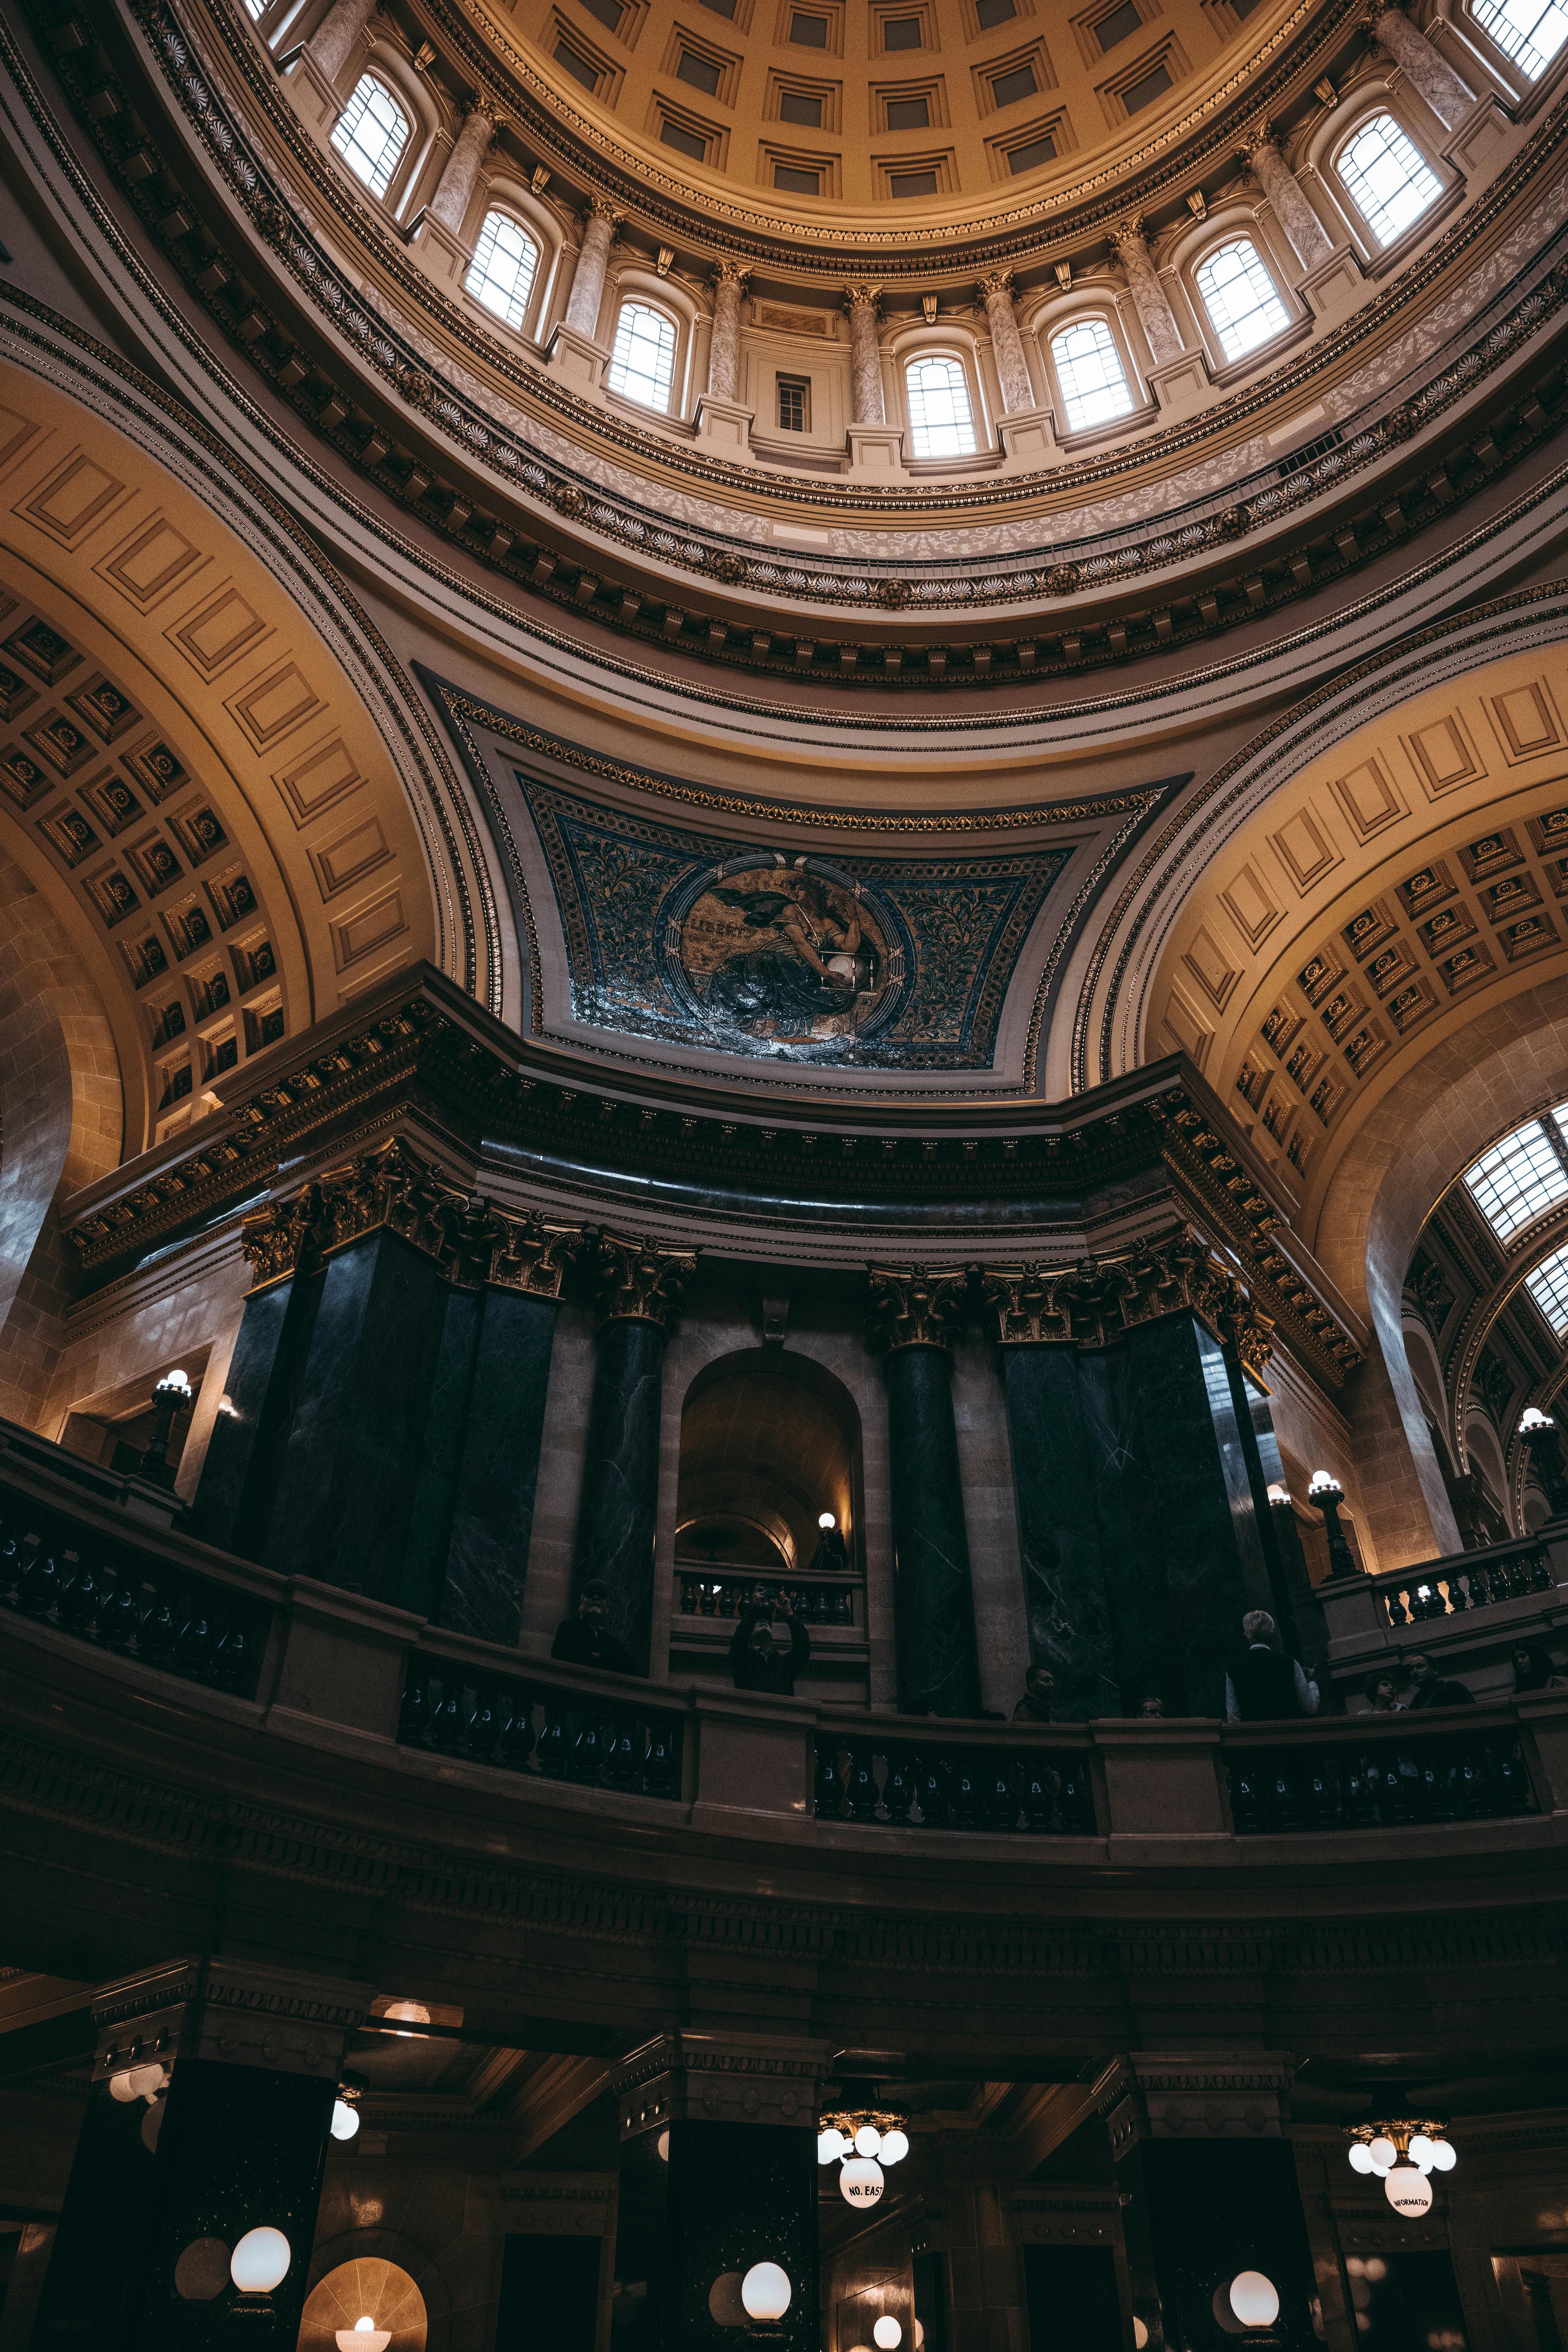 The interior of the Capital State Building in Madison Wisconsin